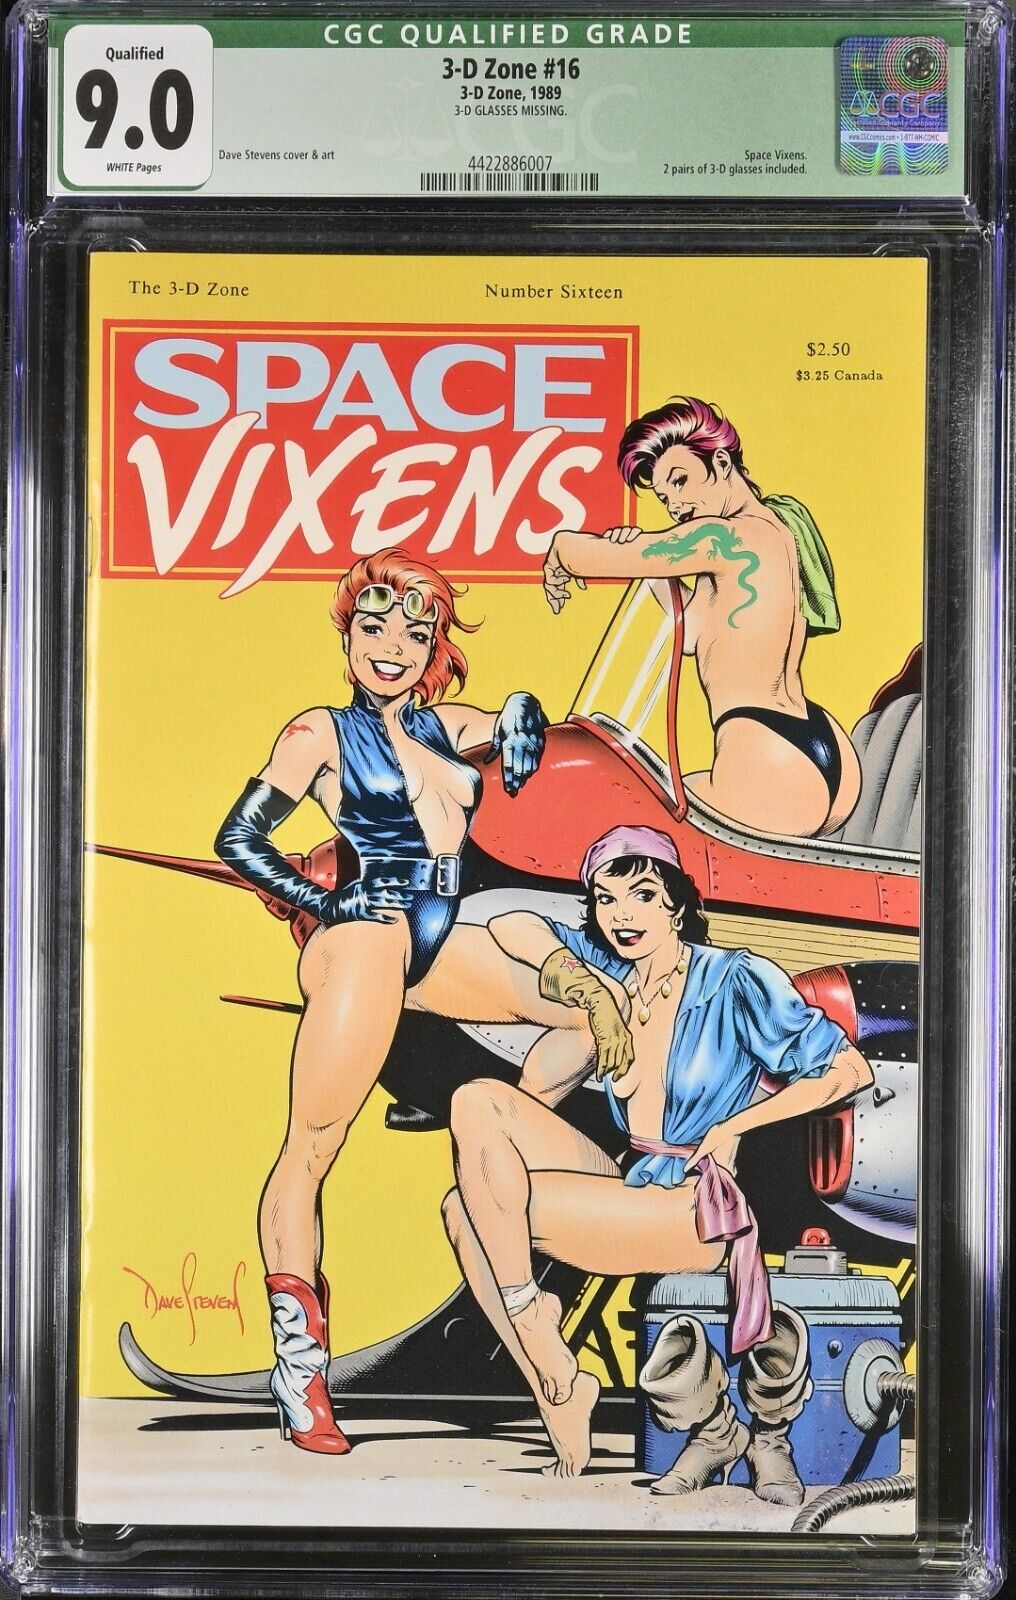 1989 3-D Zone 16 Space Vixens CGC 9.0 Dave Stevens GGA White Pages RARE BOOK